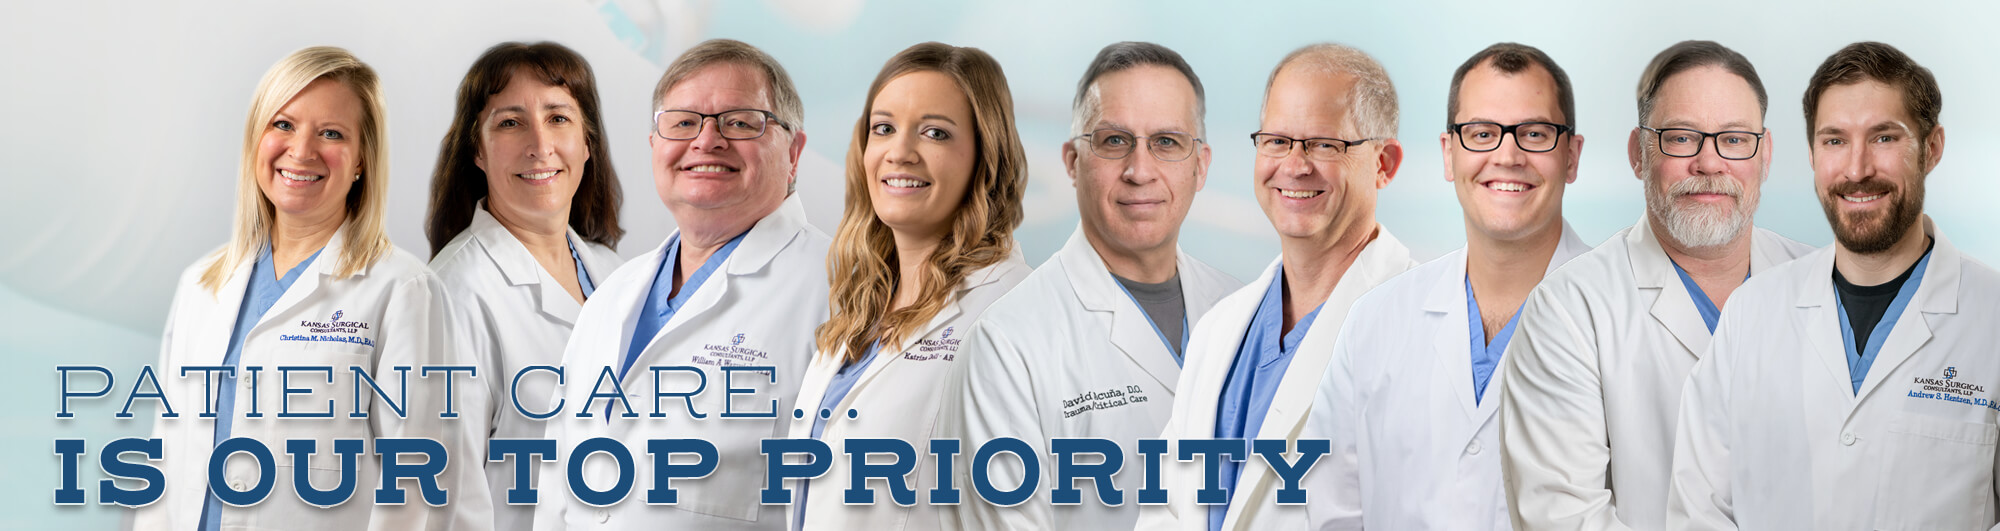 At Kansas Surgical Consultants our talented providers believe that Patient Care is the top priority